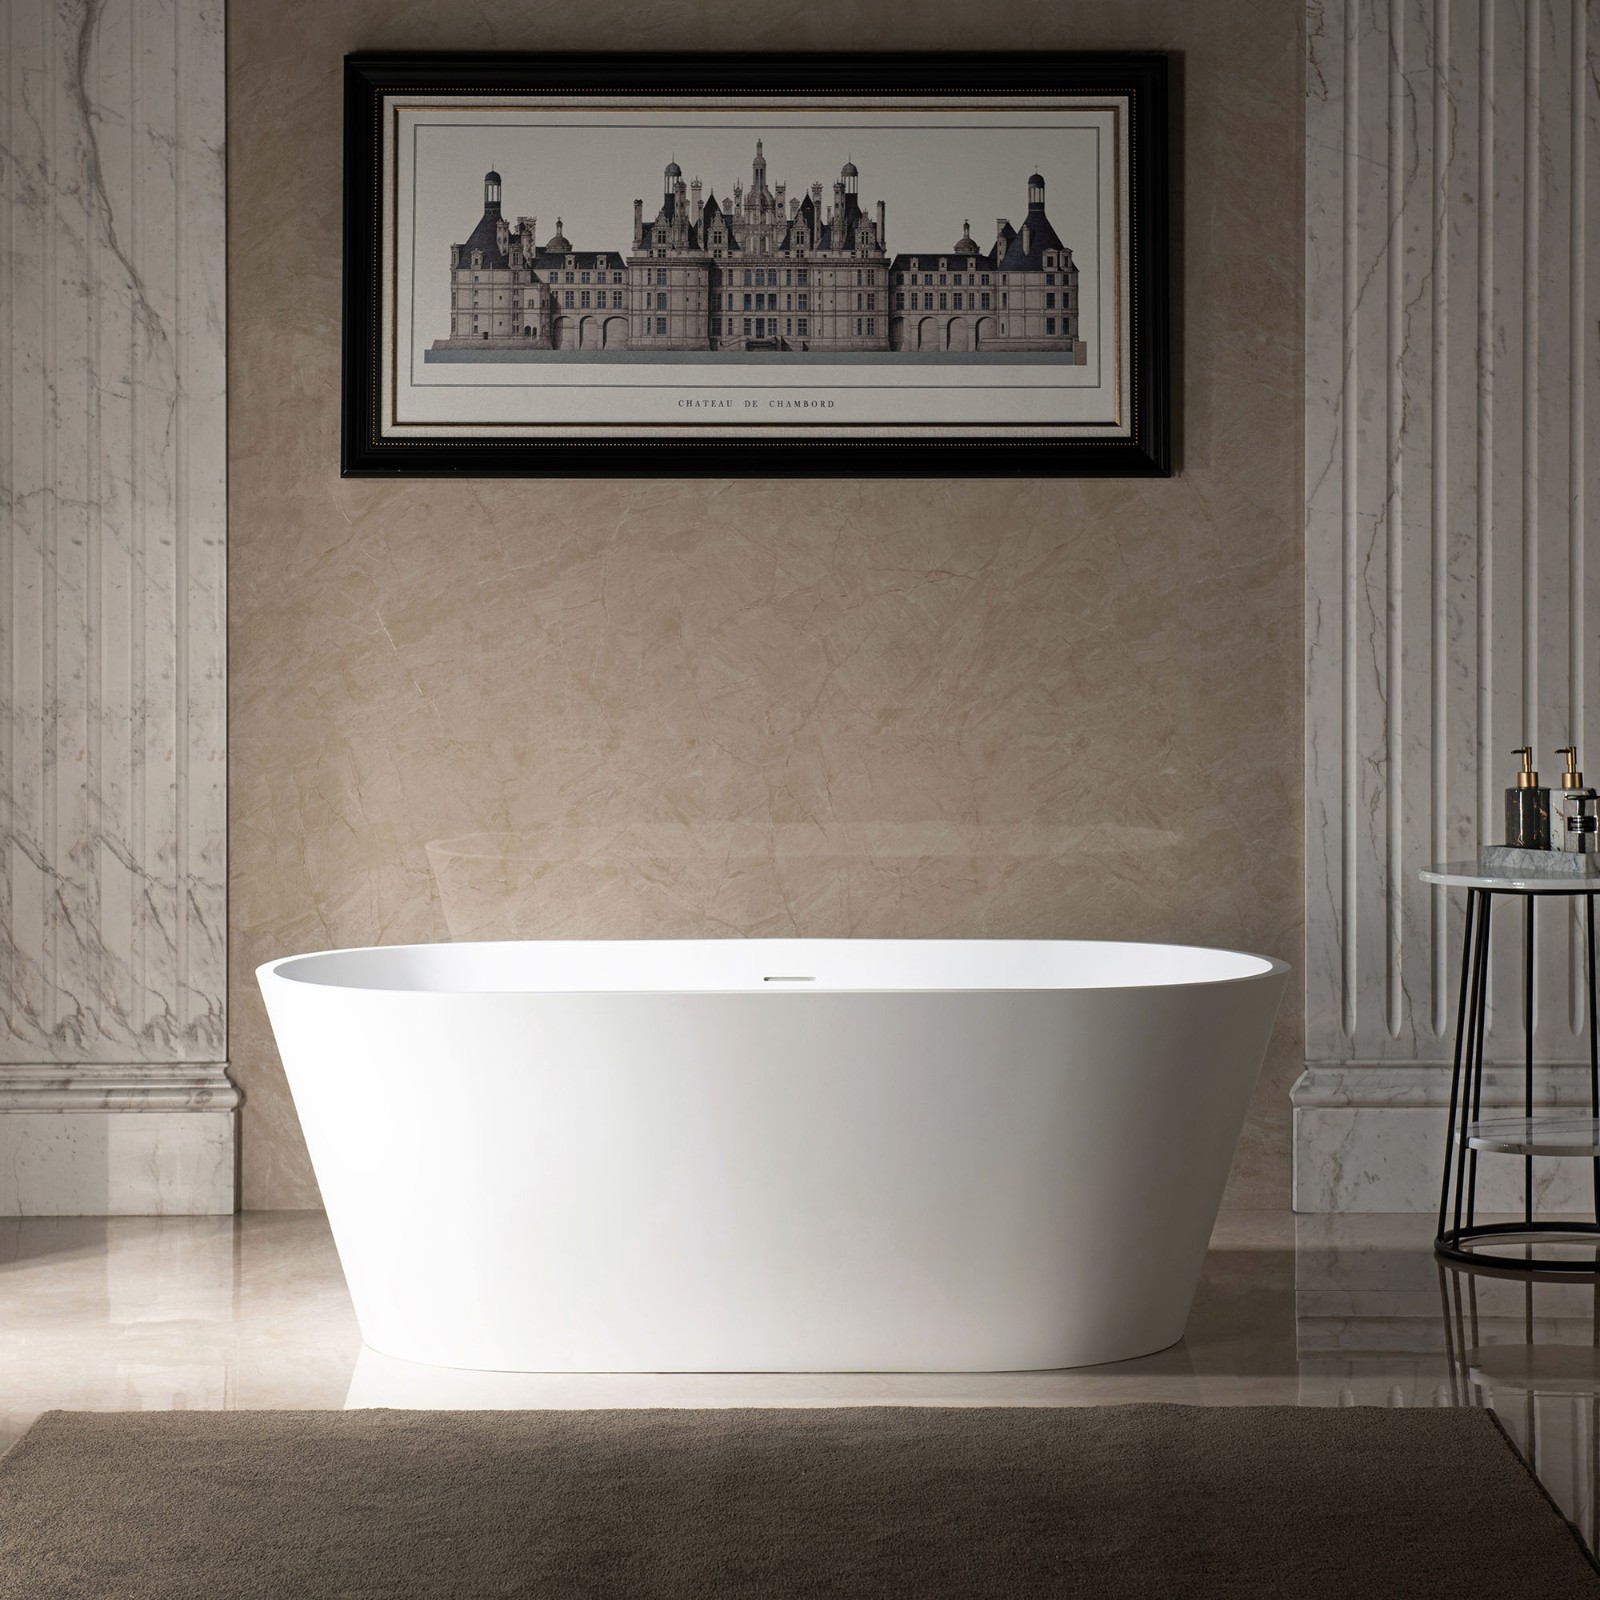  WOODBRIDGE 59 in. x 29 in. Luxury Contemporary Solid Surface Freestanding Bathtub in Matte White_642